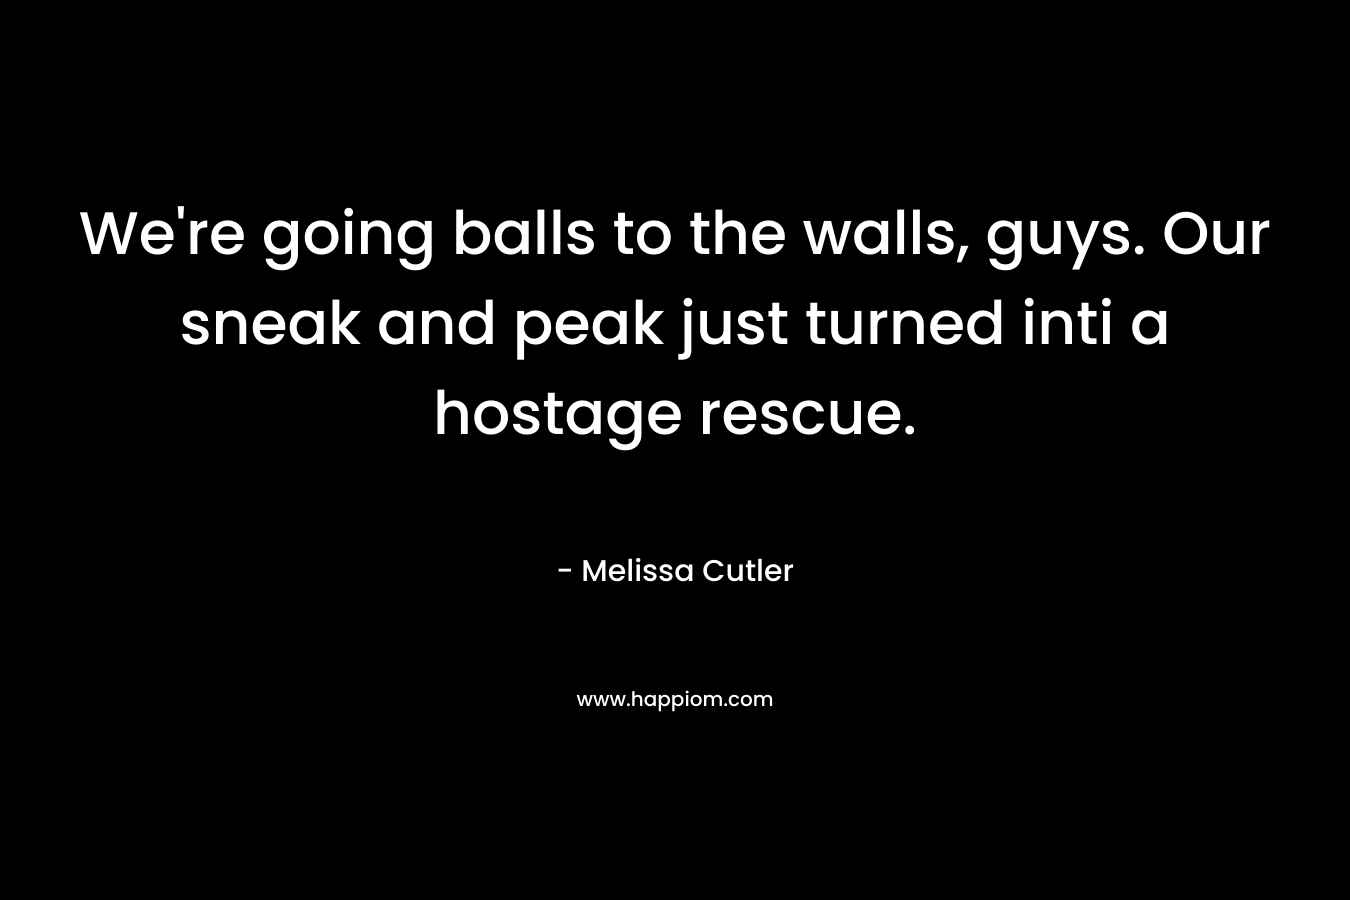 We’re going balls to the walls, guys. Our sneak and peak just turned inti a hostage rescue. – Melissa Cutler